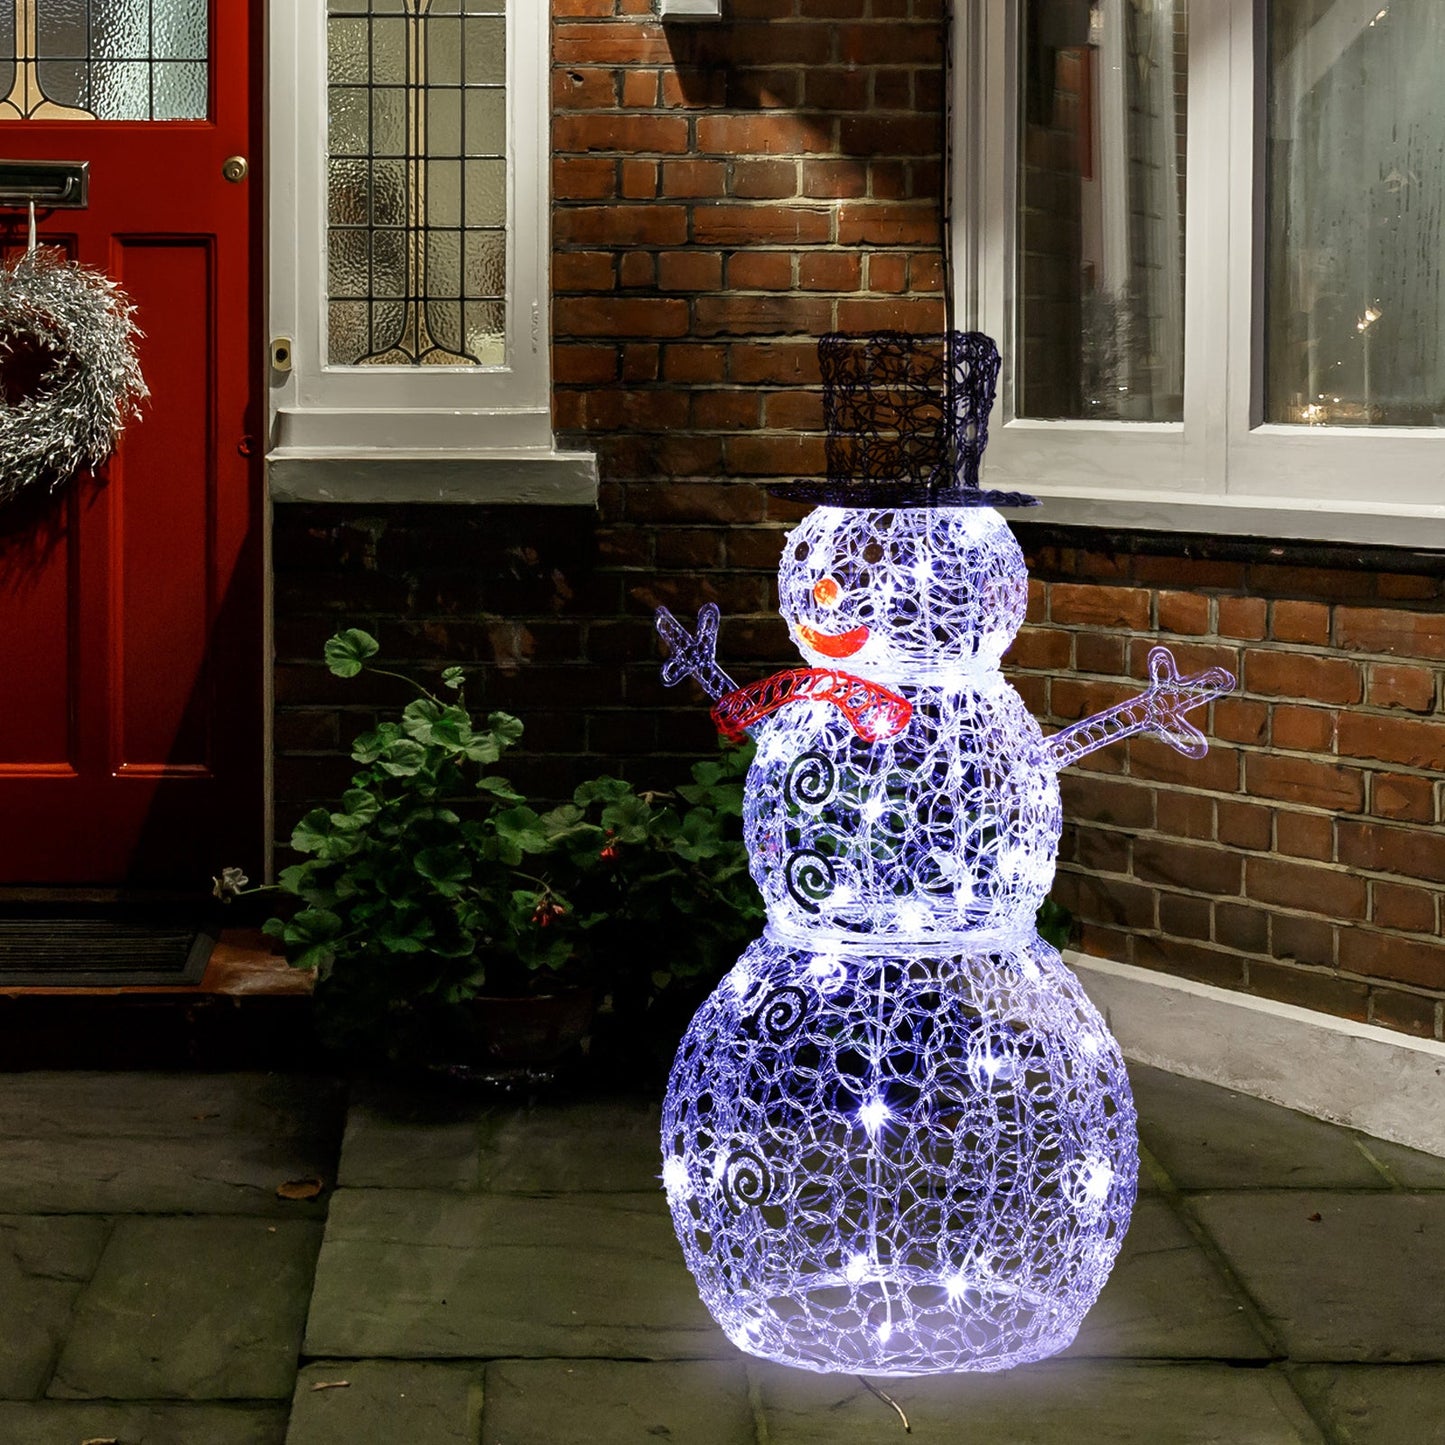 3ft Clear Acrylic with 100 String Lights Garden Snowman Decoration hello-826